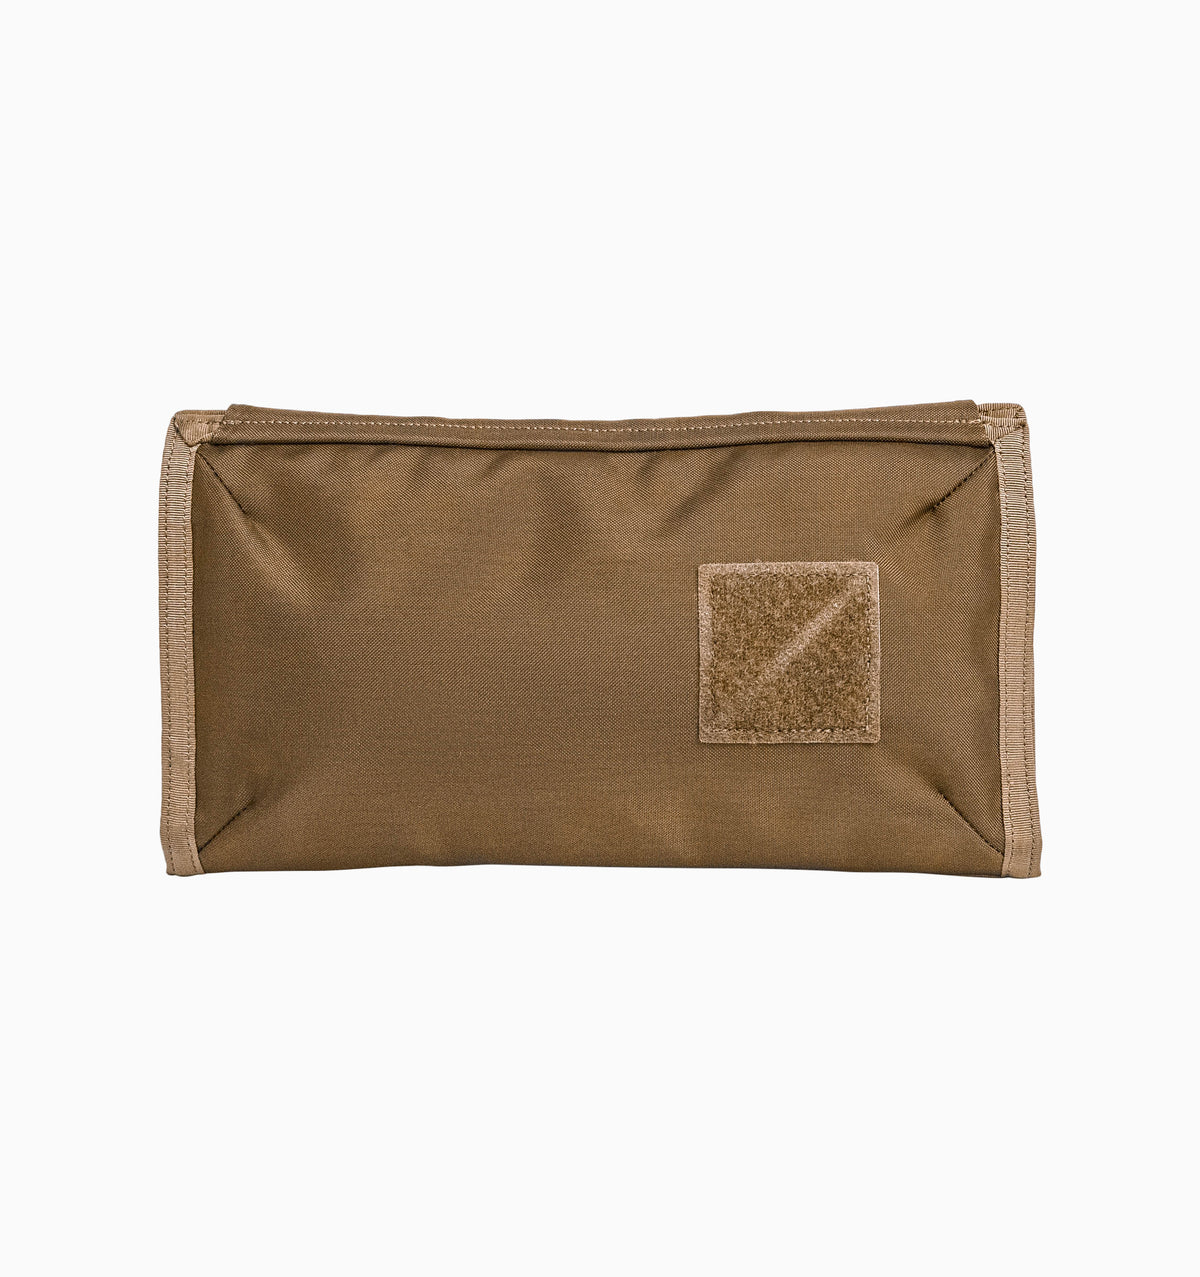 Evergoods Civic Access Pouch 1L - Coyote Brown